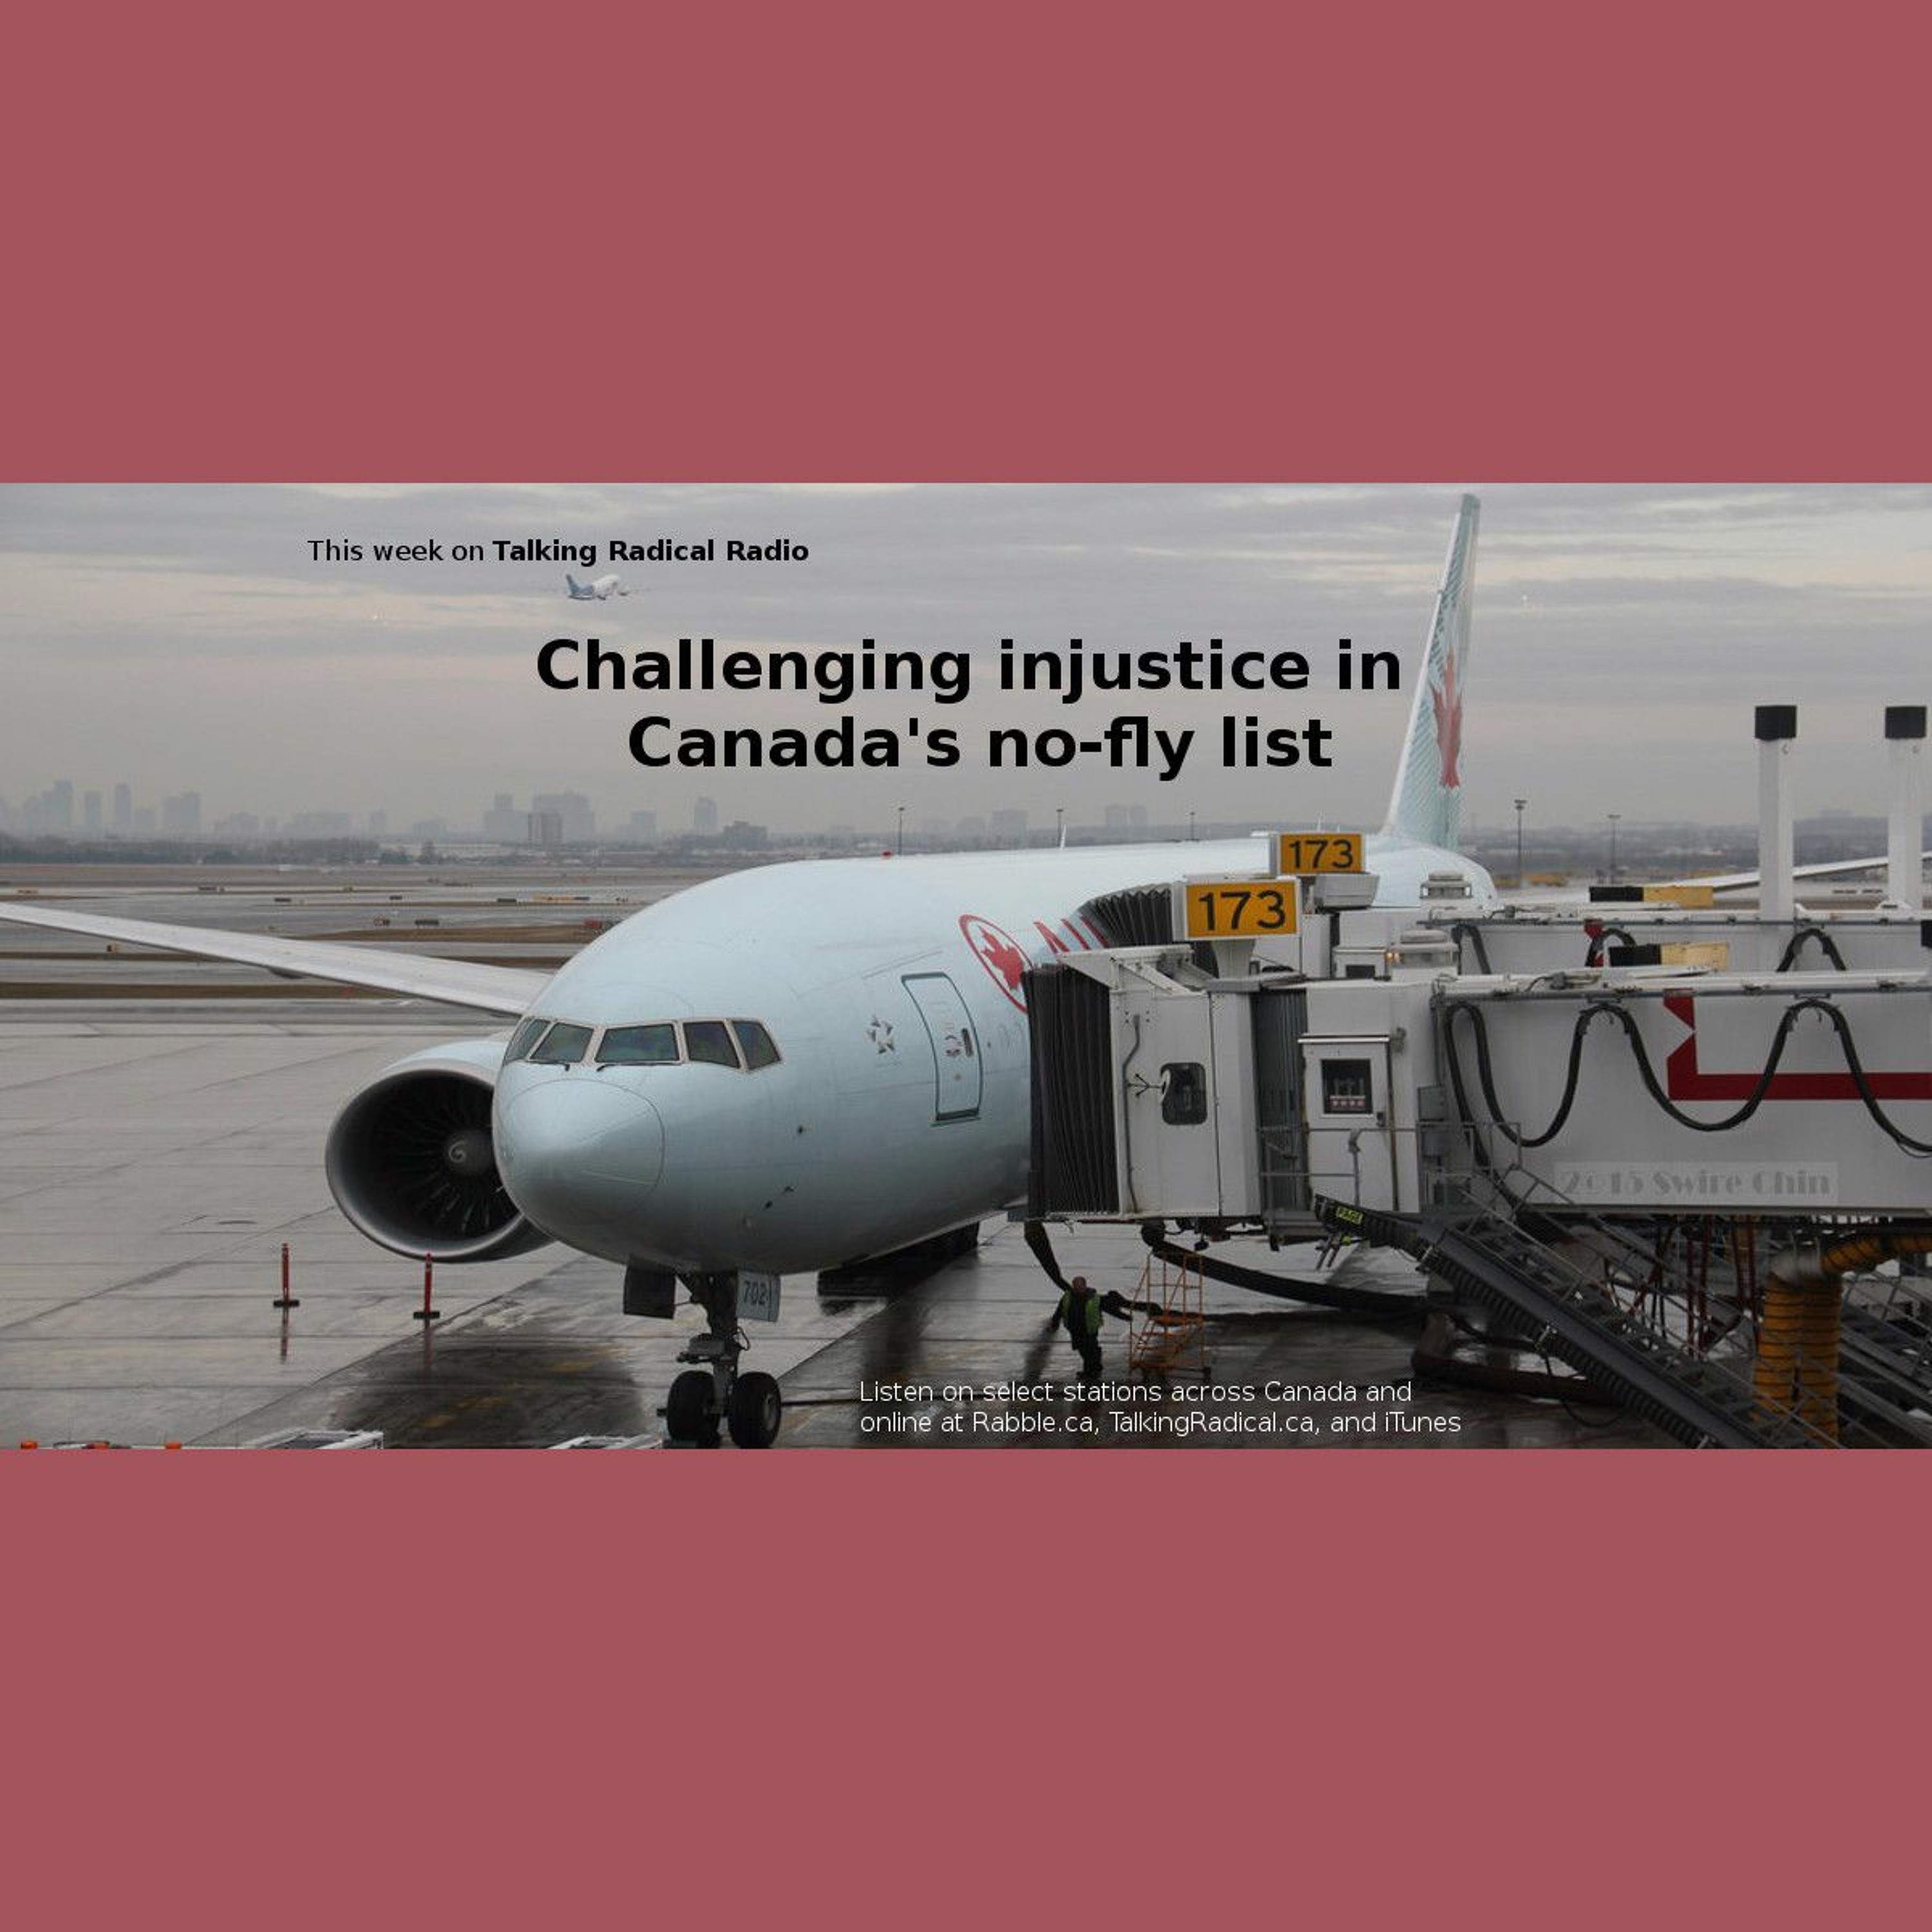 Challenging injustice in Canada's no-fly list